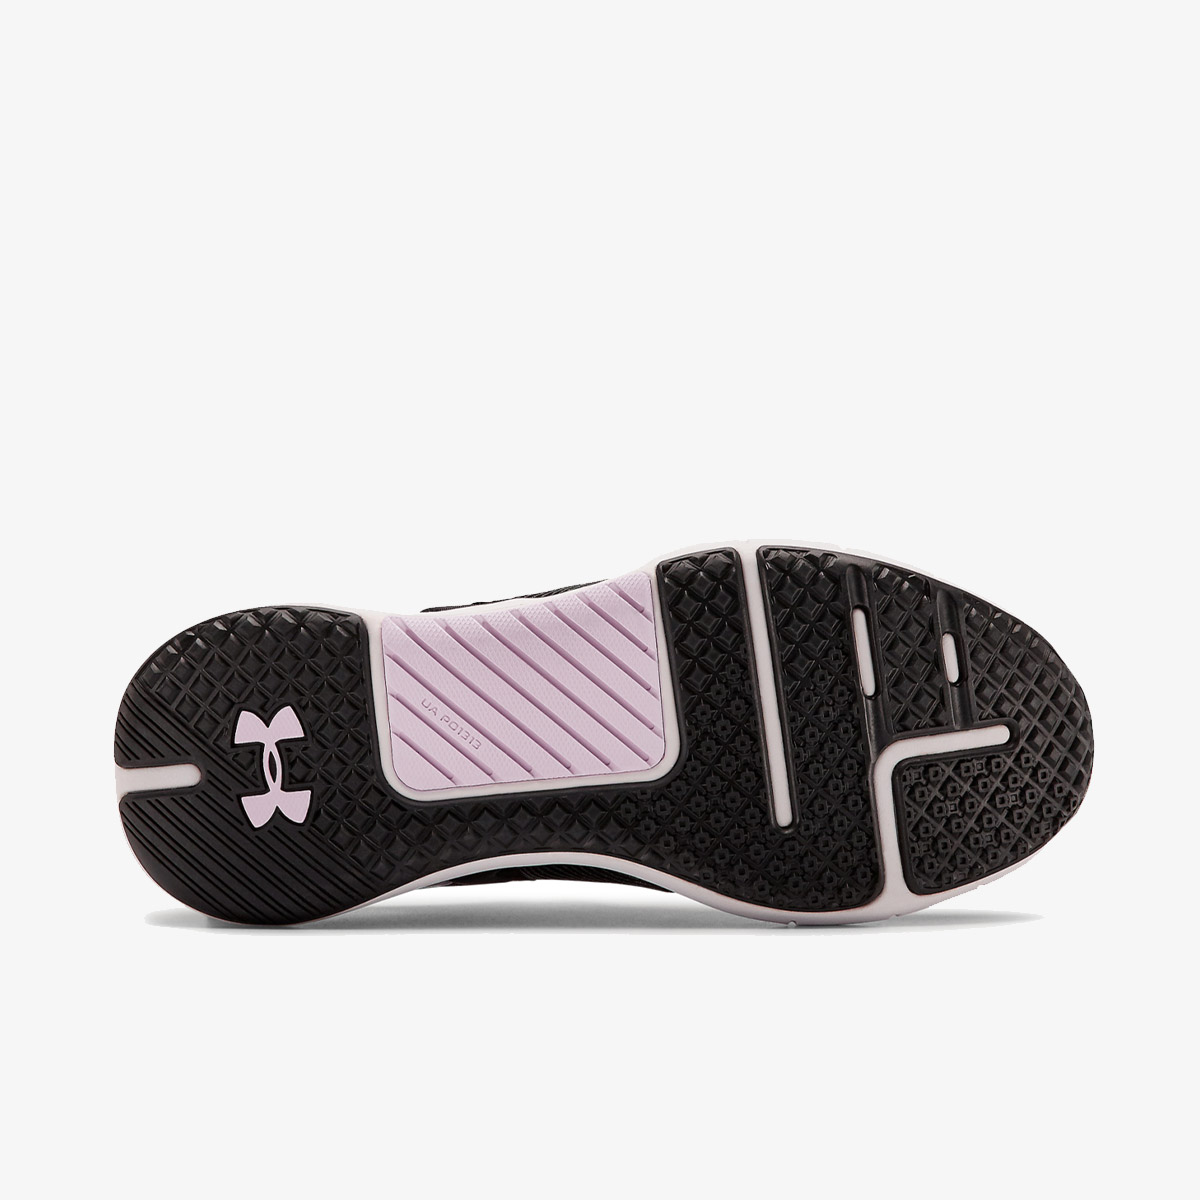 Under Armour UA HOVR RISE 2 LUX 